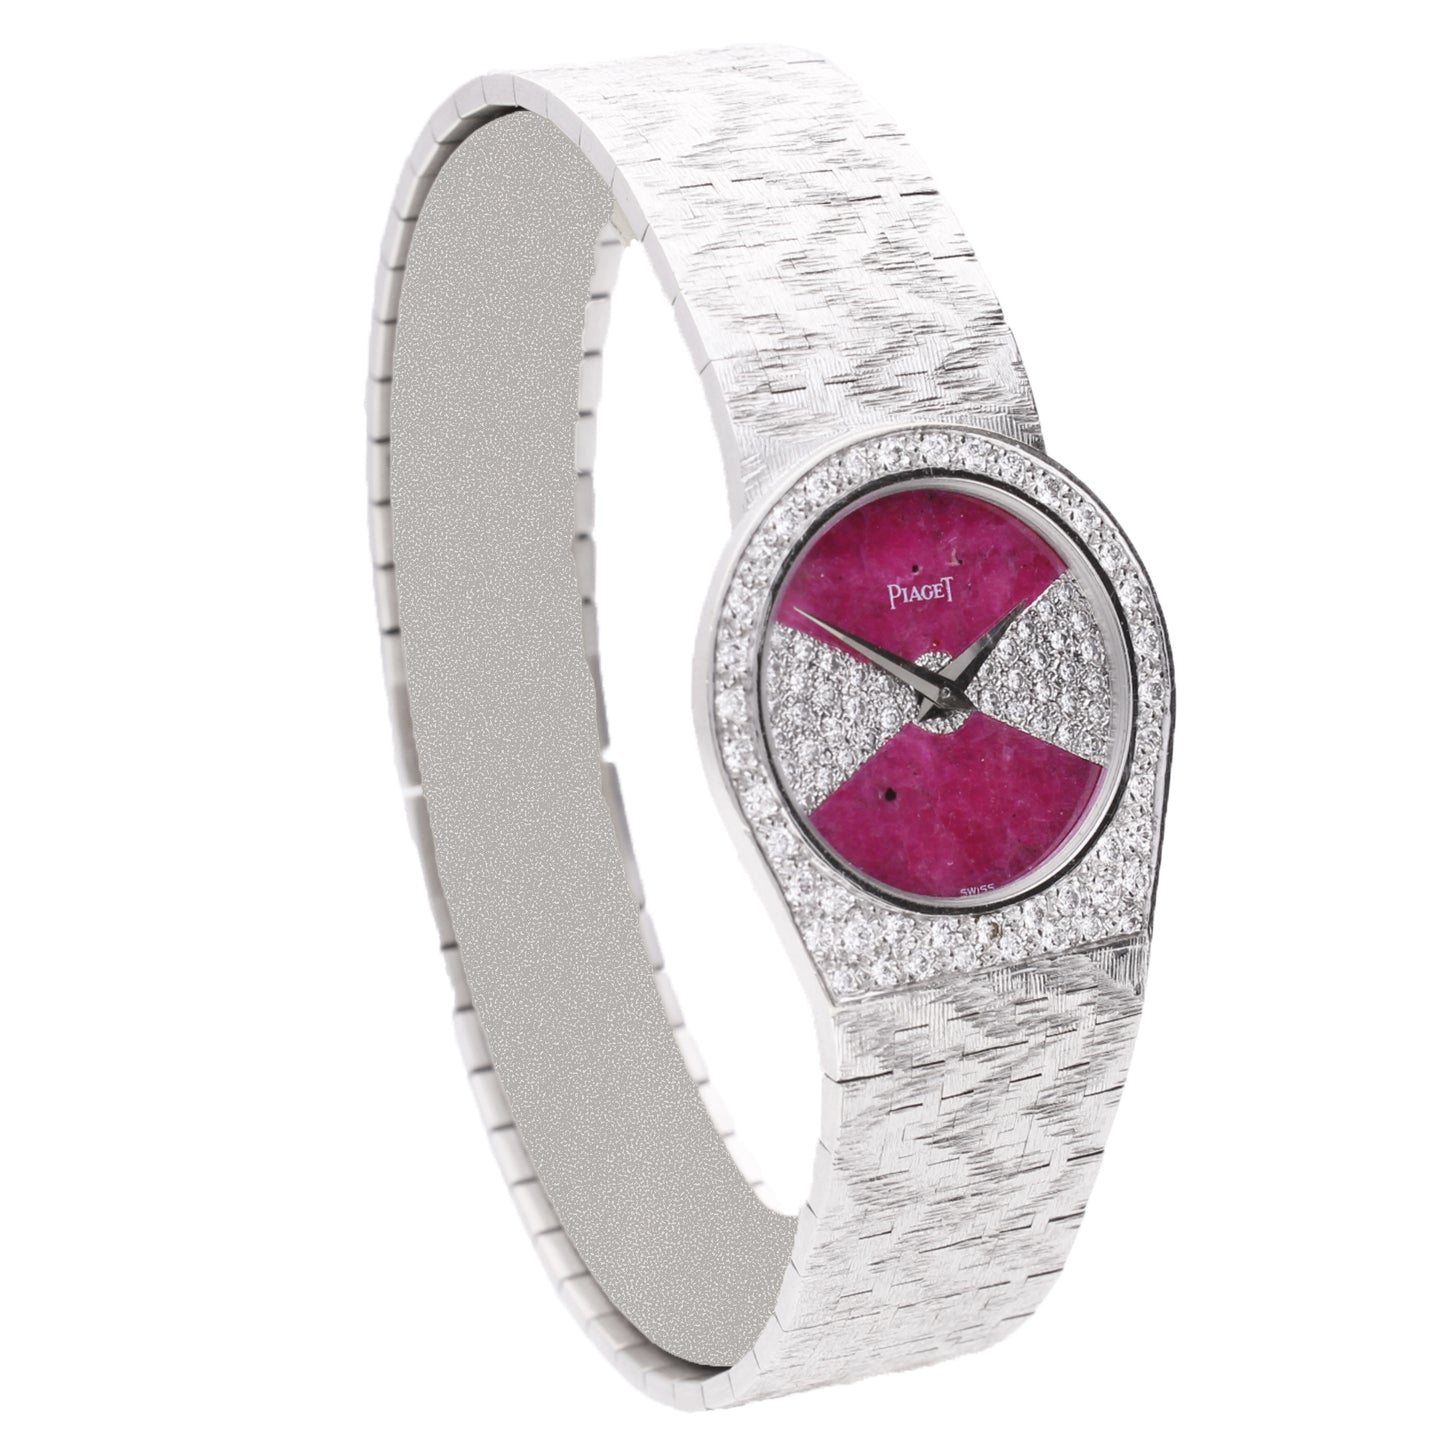 18ct white gold Piaget diamond and ruby set dial and diamond set bezel bracelet watch. Made 1970